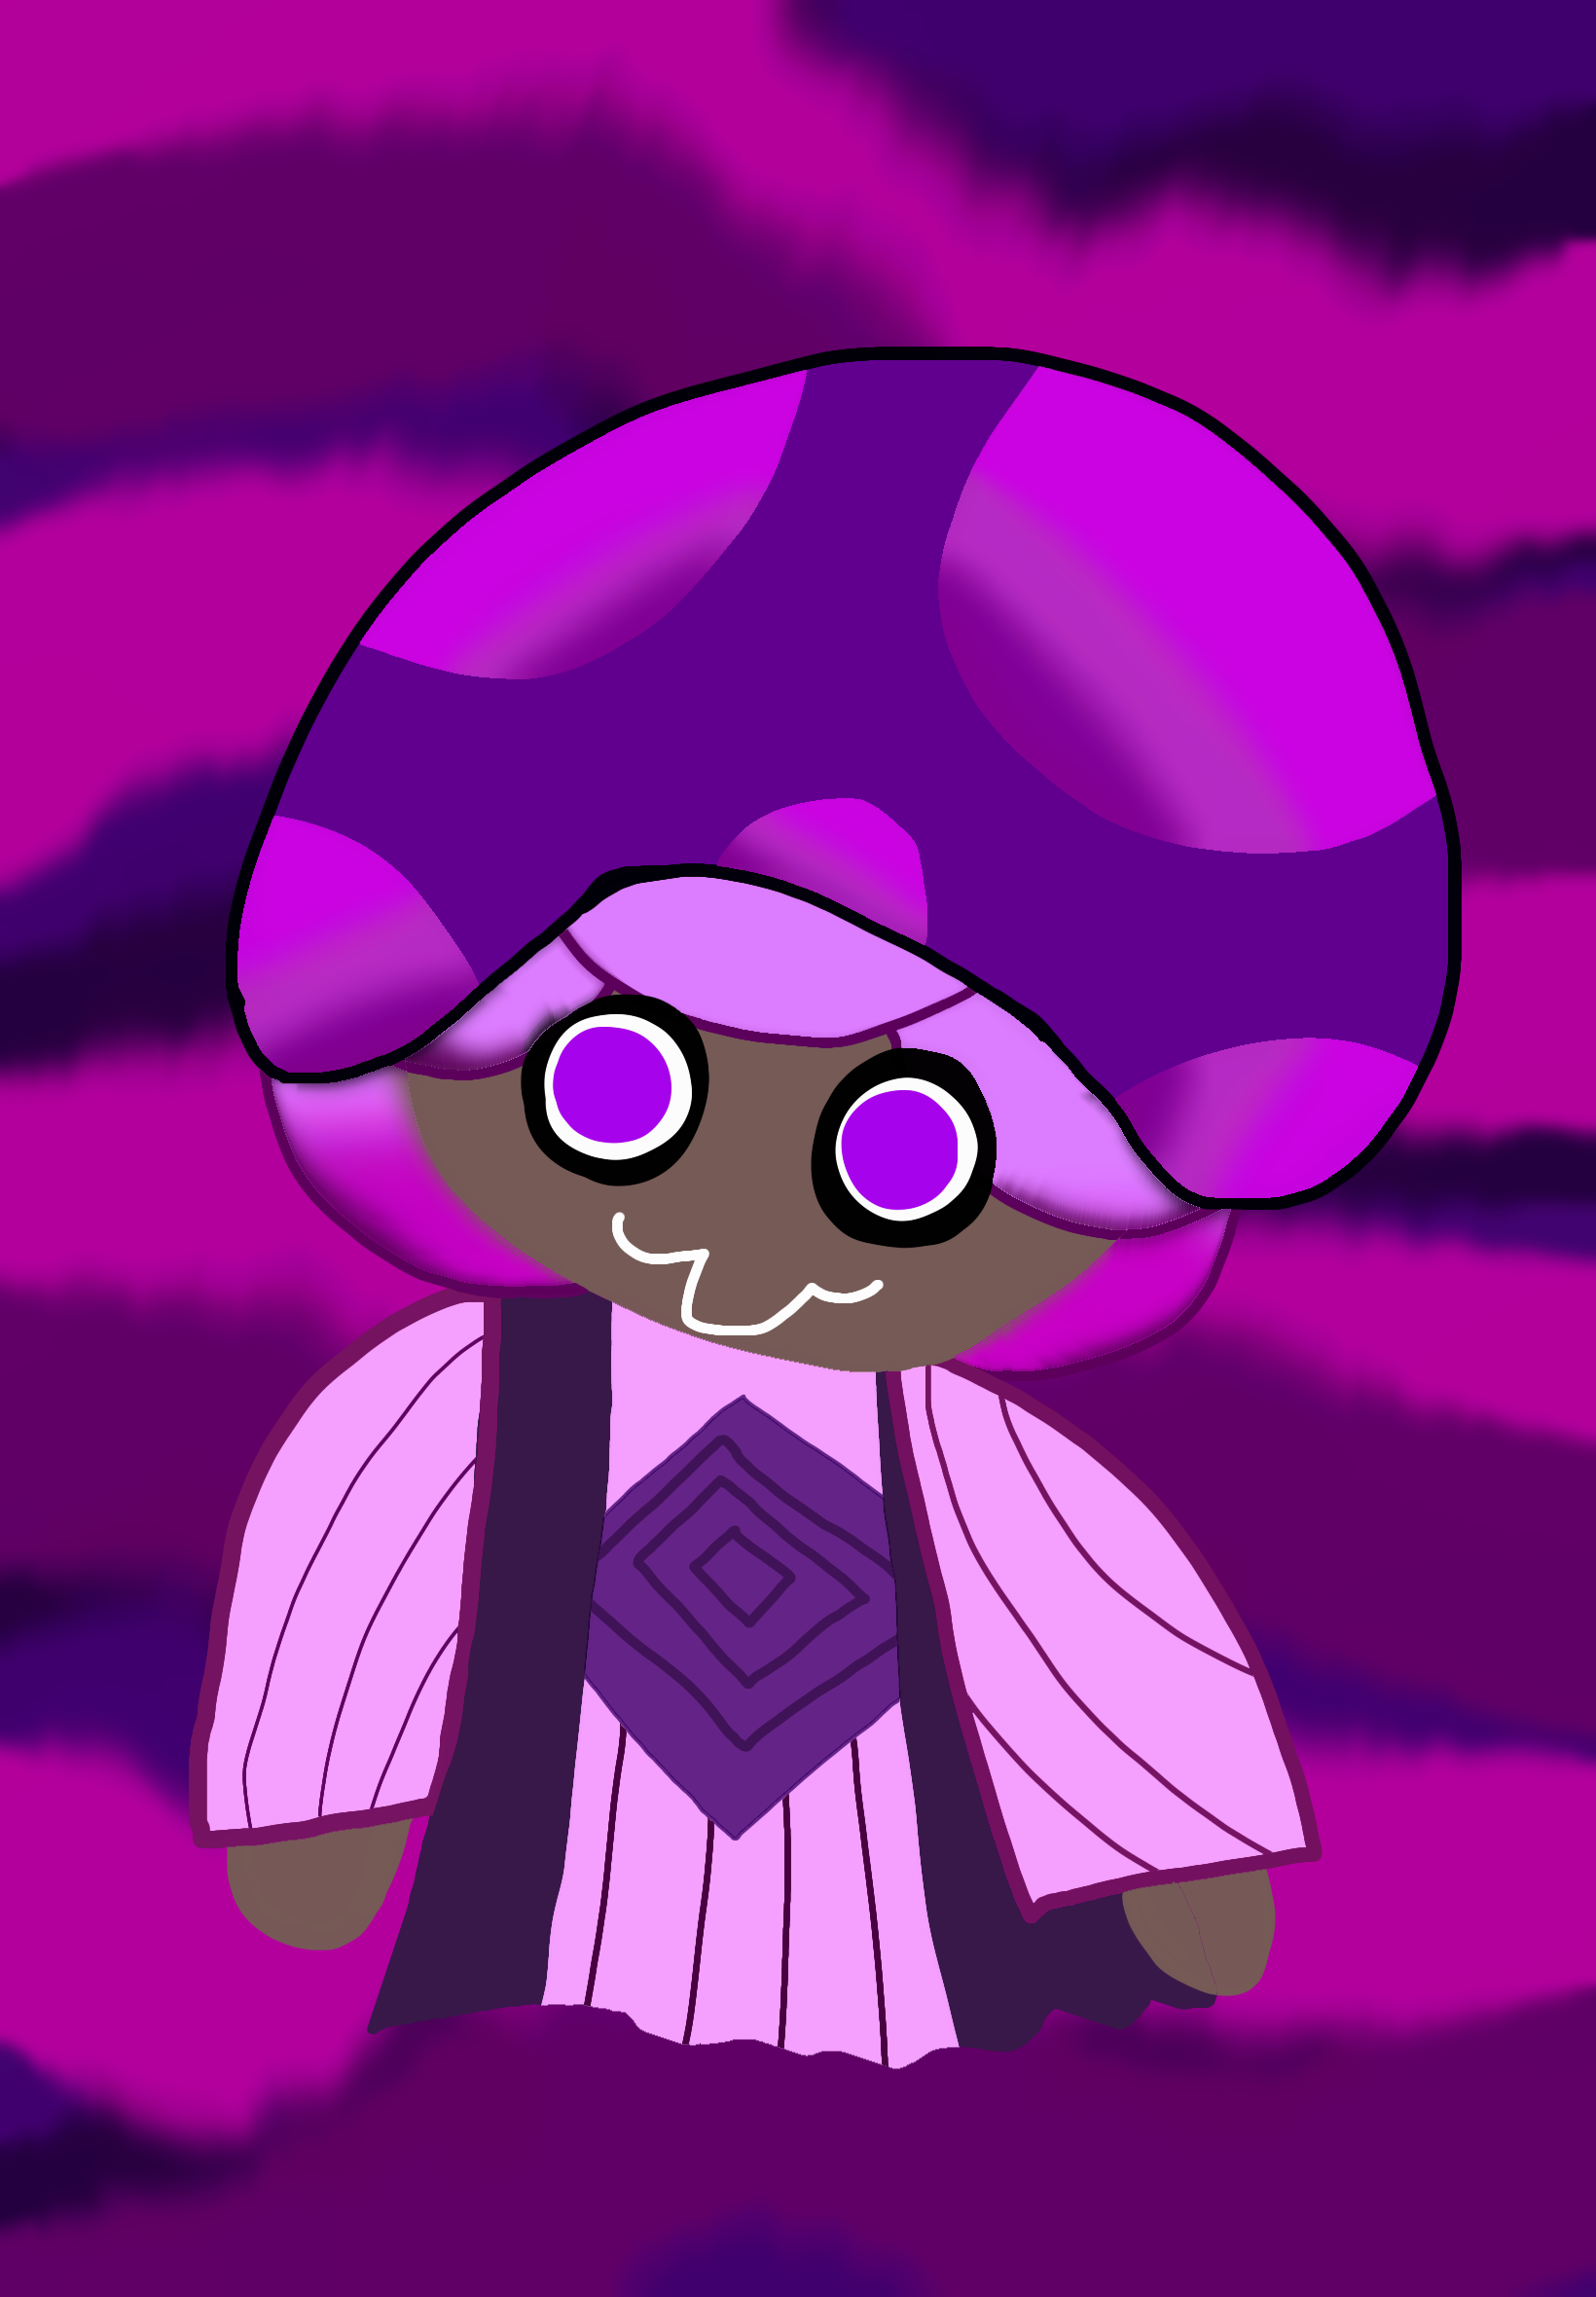 Poison mushroom cookie by GeremiahsWorld on Newgrounds